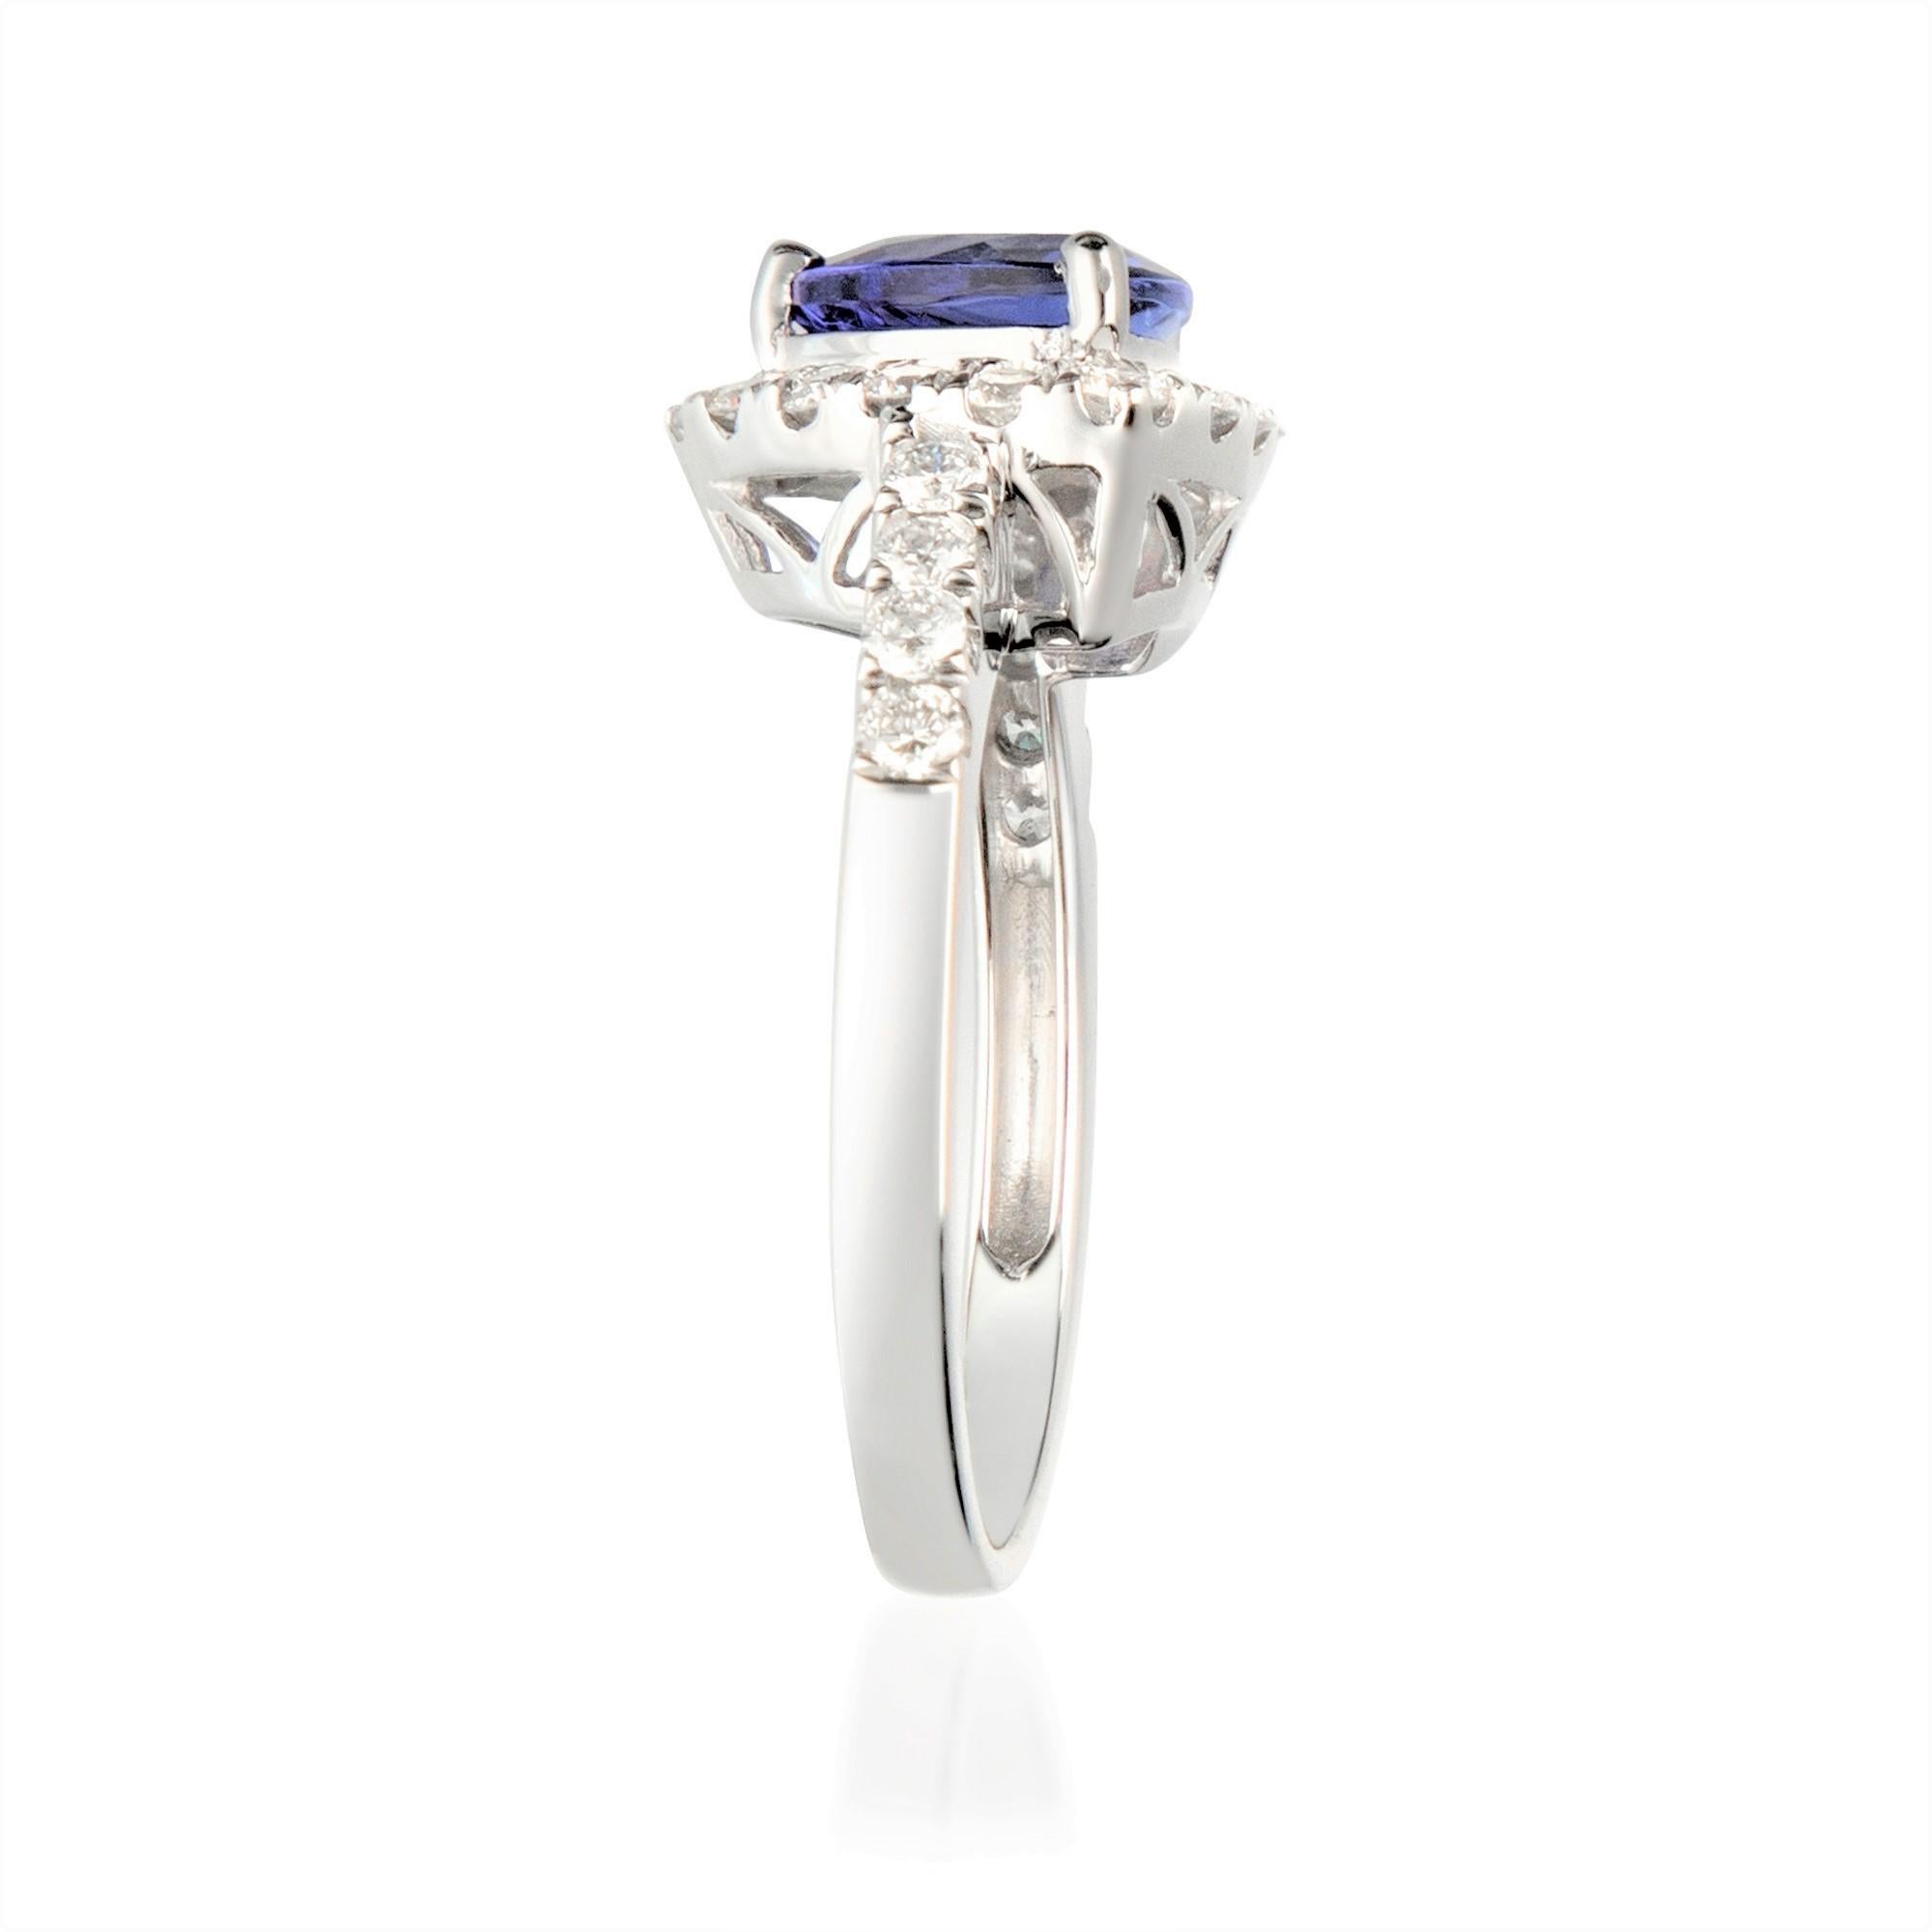 This beautiful Tanzanite Ring is crafted in 14-karat White gold and features a 1.72 carat trillion cut Genuine Tanzanite, 23 Pcs Round White Diamonds in GH- I1 quality with 0.70 ct. in a prong-setting. This Rings comes in in sizes 6 to 9, and it is